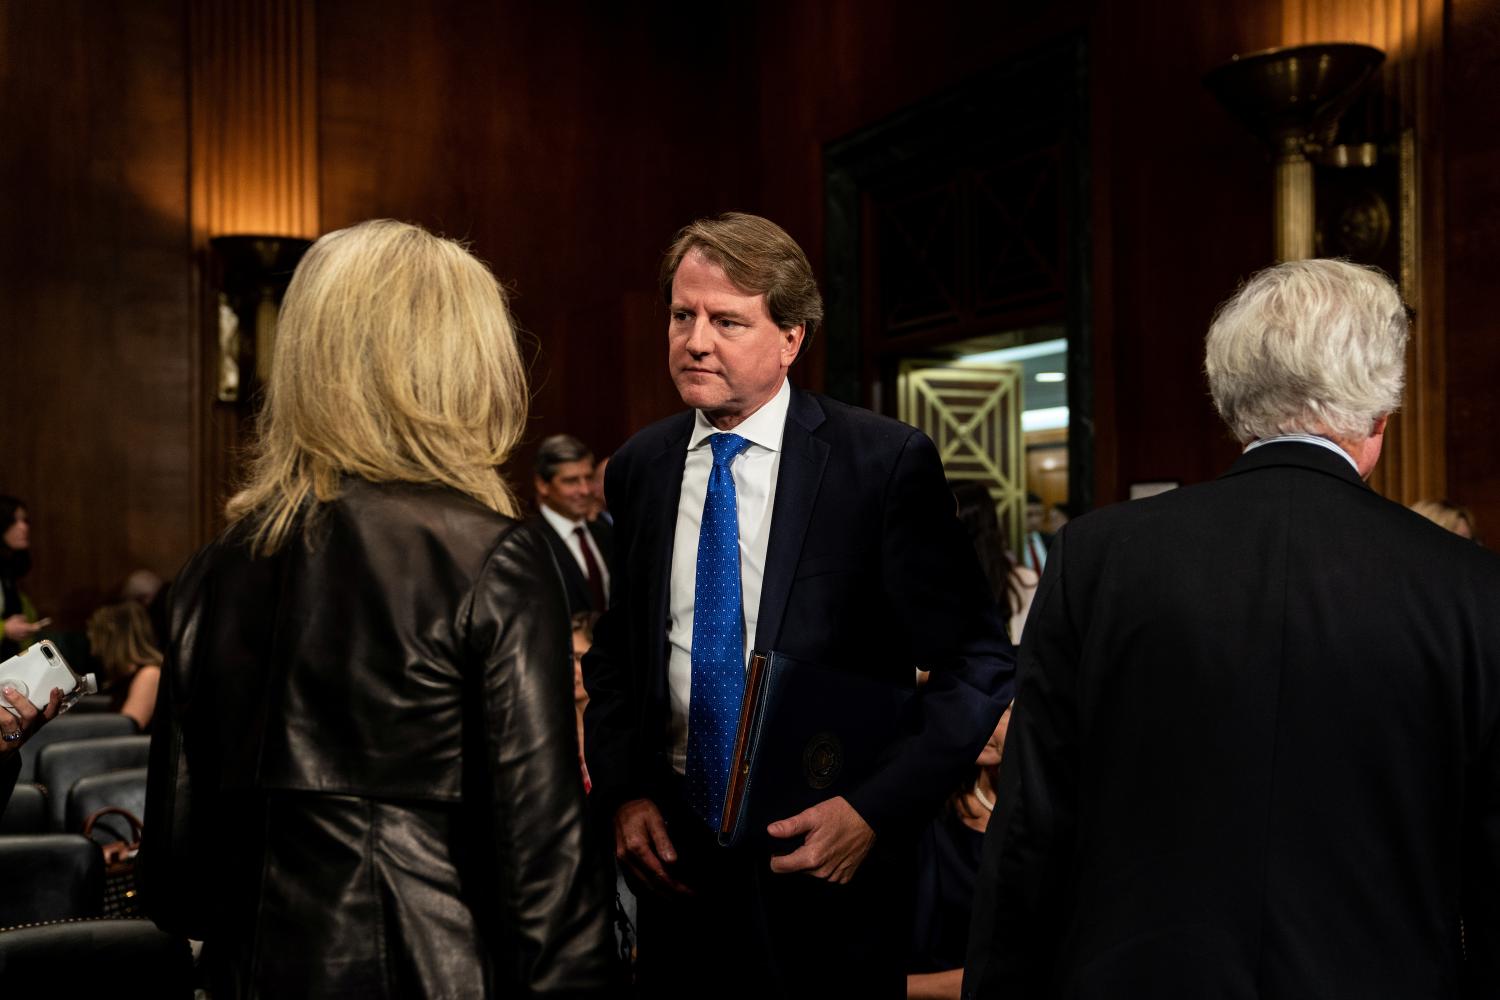 White House Counsel Don McGahn is seen at testimony of Judge Brett Kavanaugh during the Senate Judiciary Committee hearing on Capitol Hill, Washington, DC, U.S. September 27, 2018.  Erin Schaff/Pool via REUTERS - RC1CF7D19850